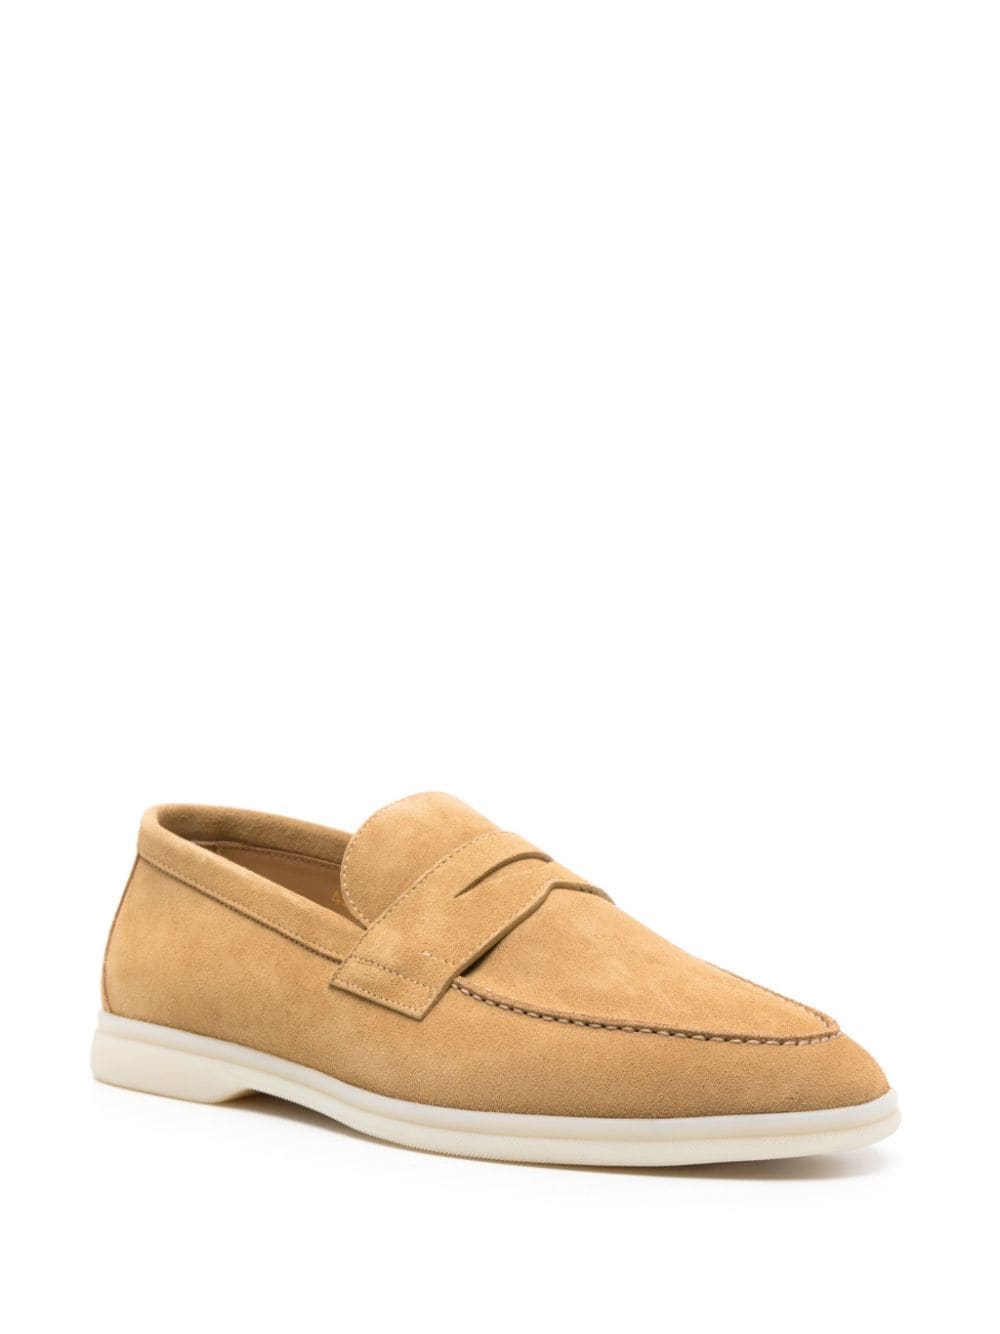 Scarosso Luciano suede loafers - Beige